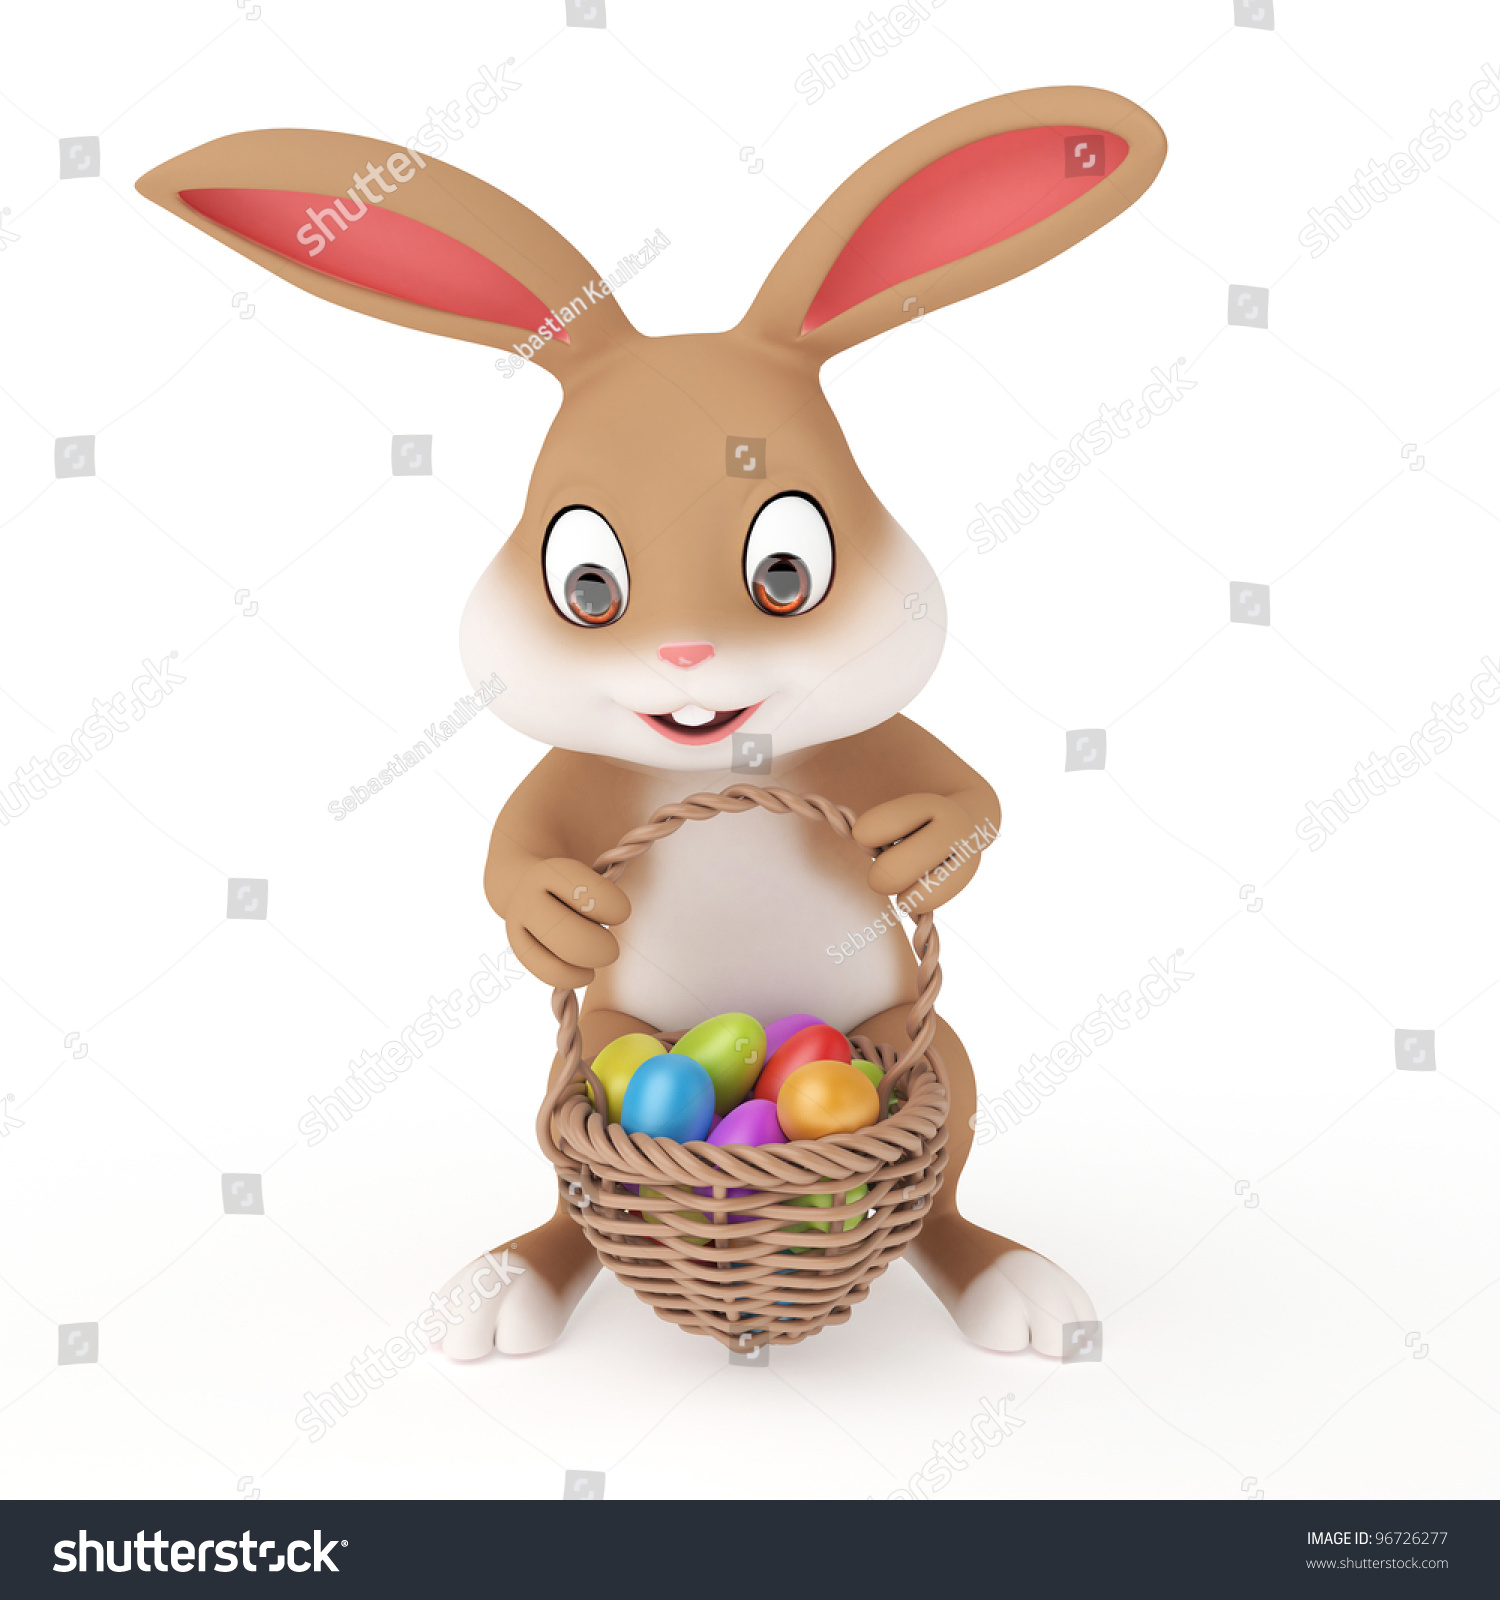 3d Rendered Illustration Of A Cute Easter Bunny - 96726277 : Shutterstock